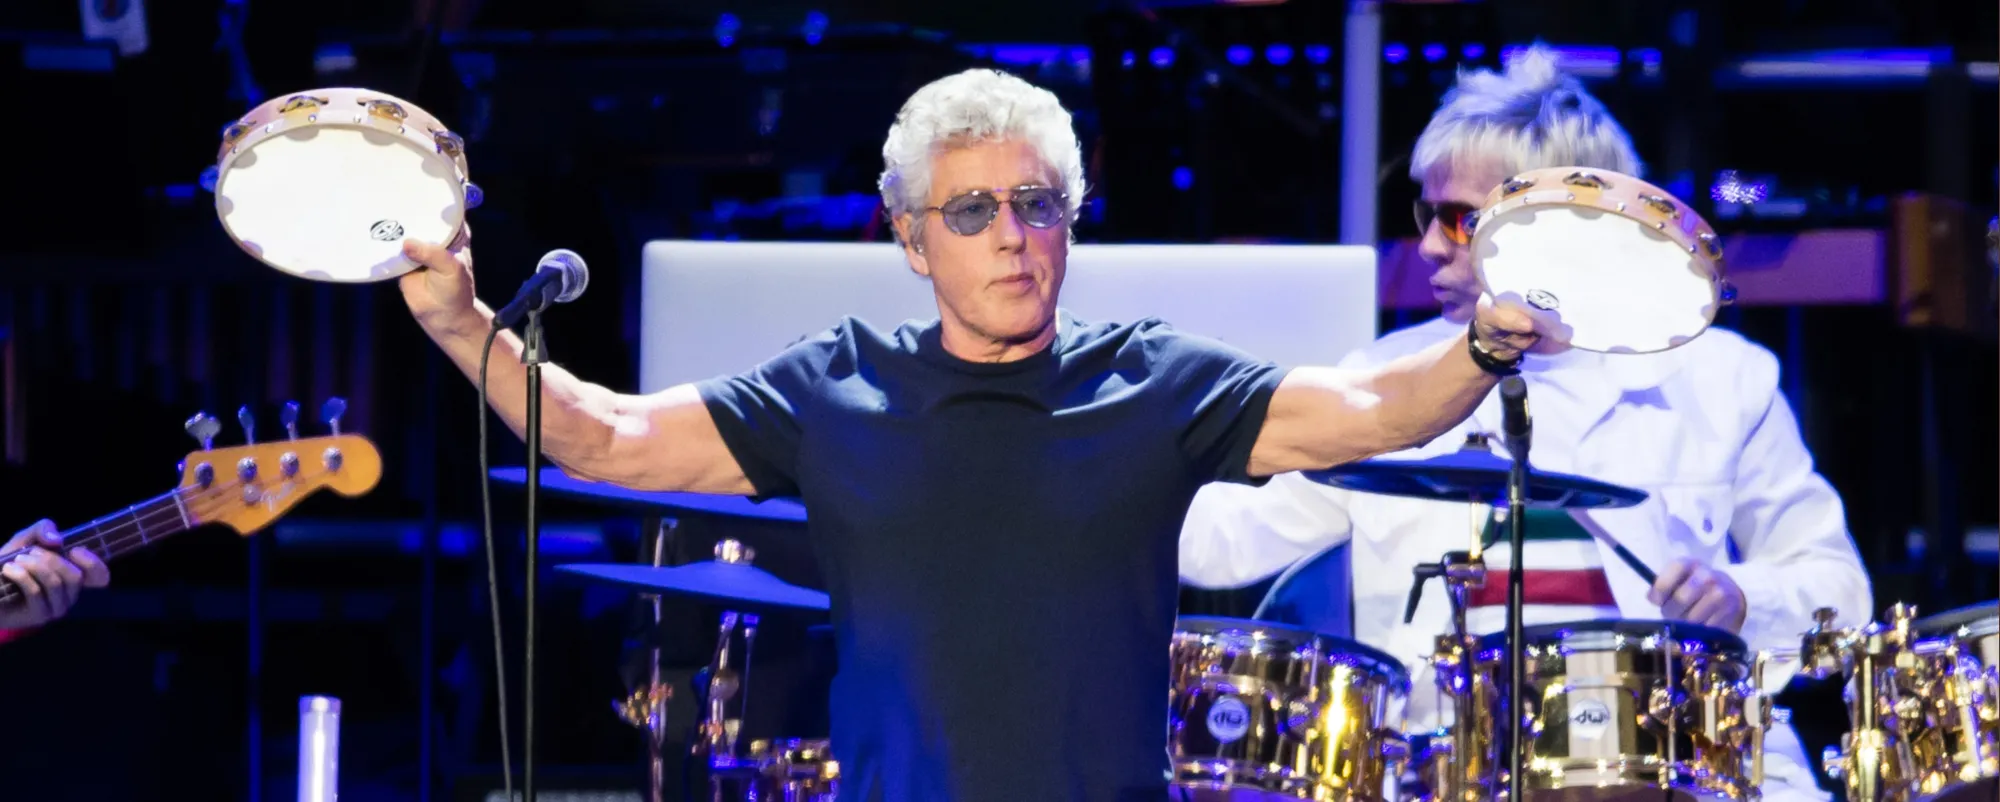 Roger Daltrey on Whether The Who Will Make a New Album—”What’s the Point?”